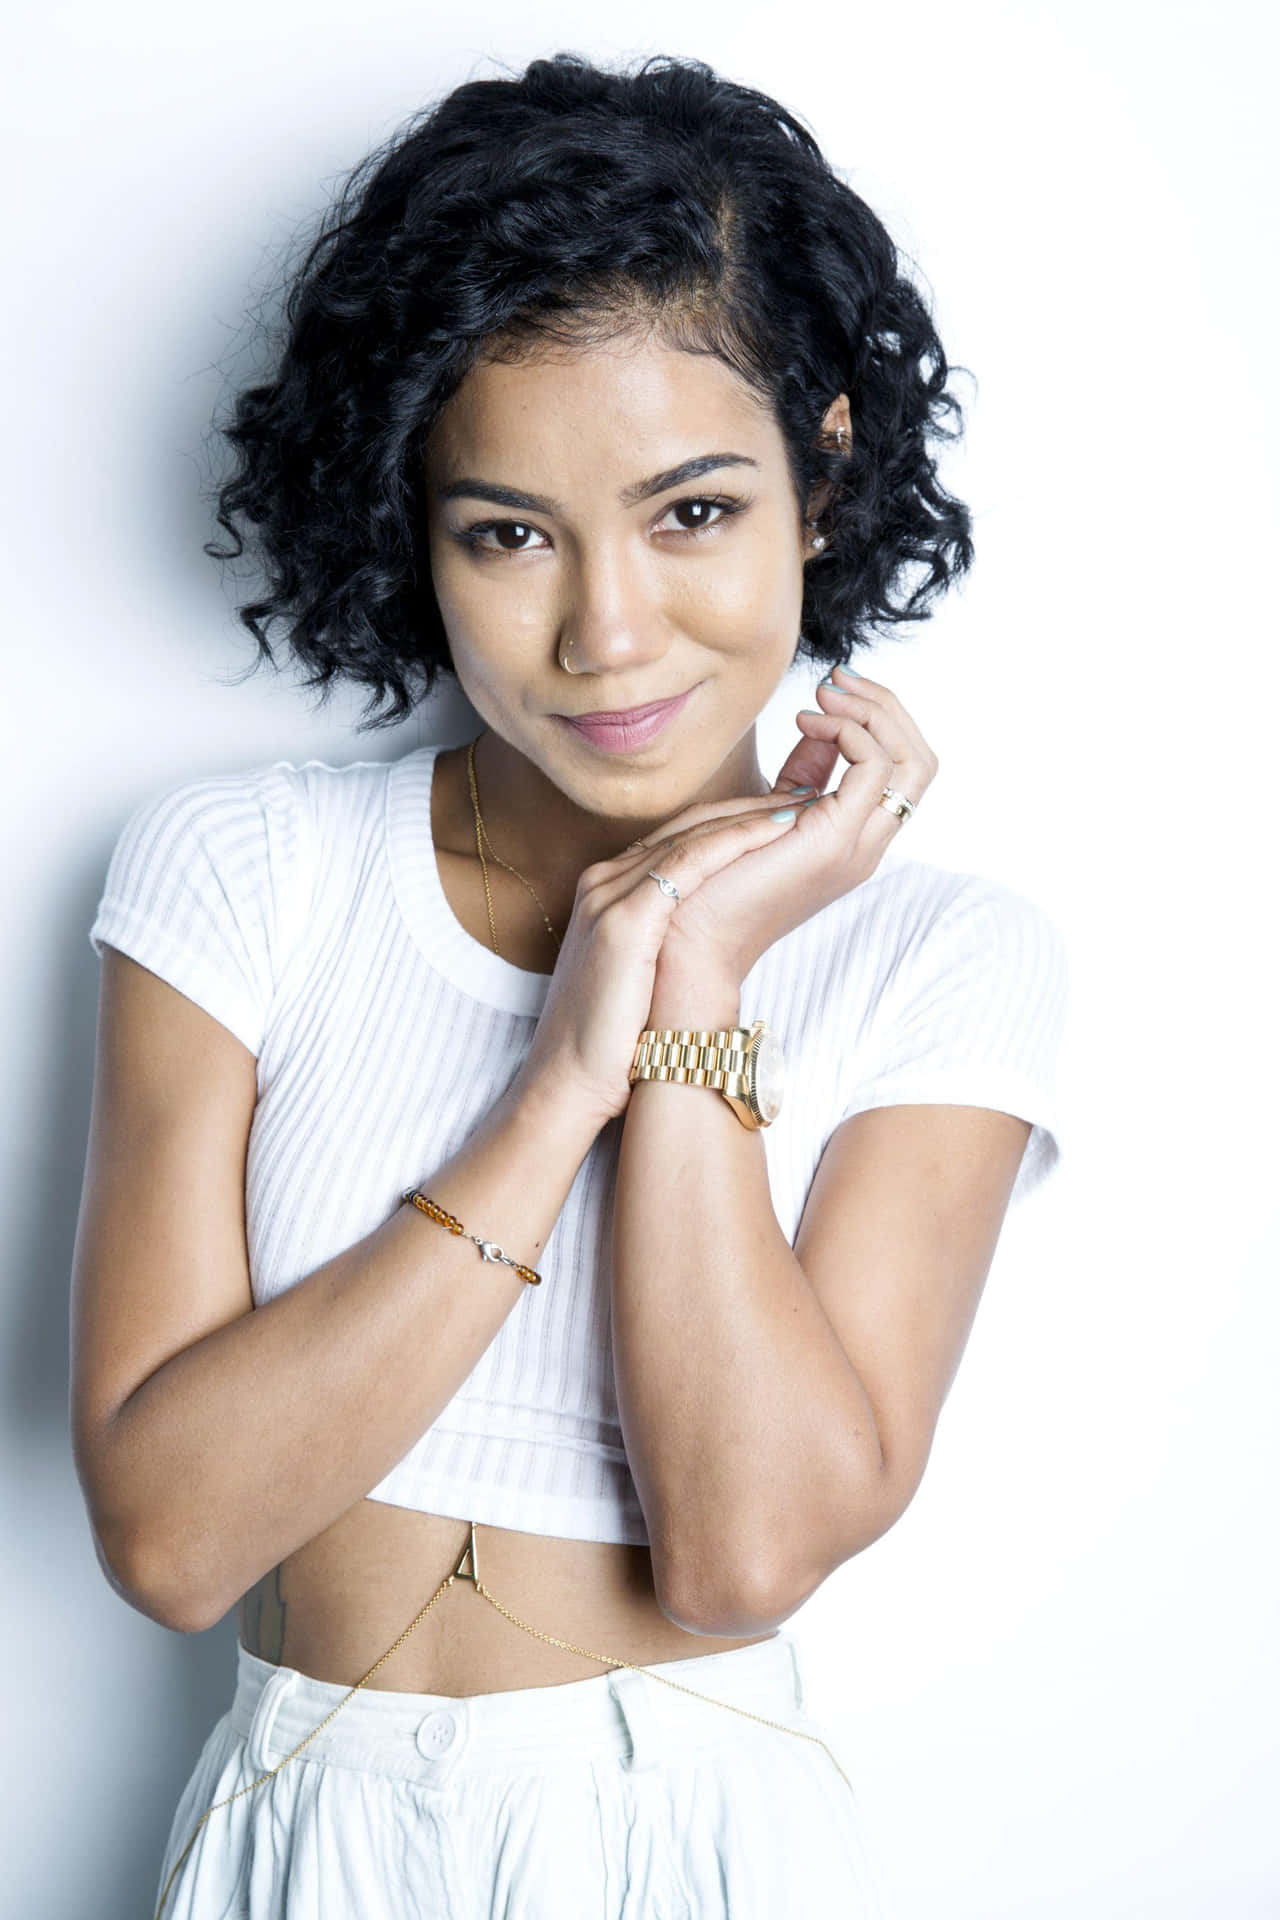 Captivating Jhene Aiko Posing for a Photoshoot Wallpaper